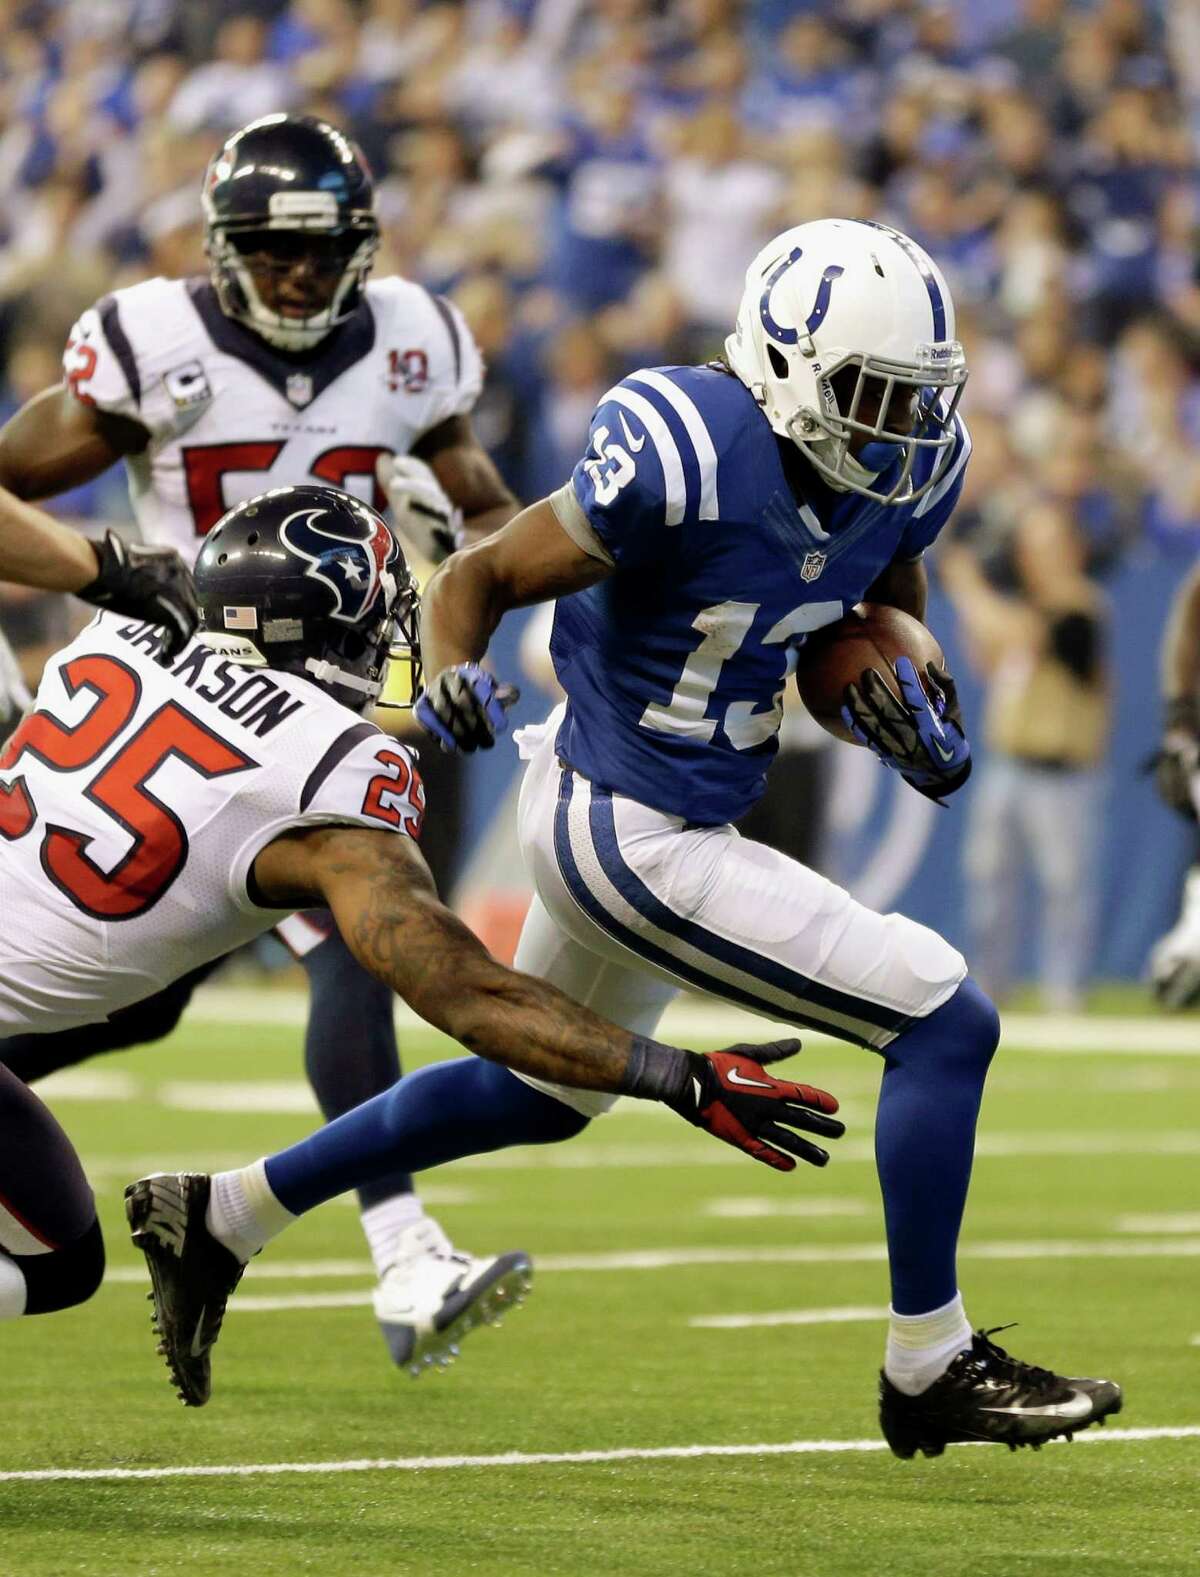 Houston Texans' Kareem Jackson (25) tackles Indianapolis Colts' T.Y. Hilton (13) during the first half of an NFL football game, Sunday, Dec. 30, 2012, in Indianapolis. (AP Photo/Michael Conroy)